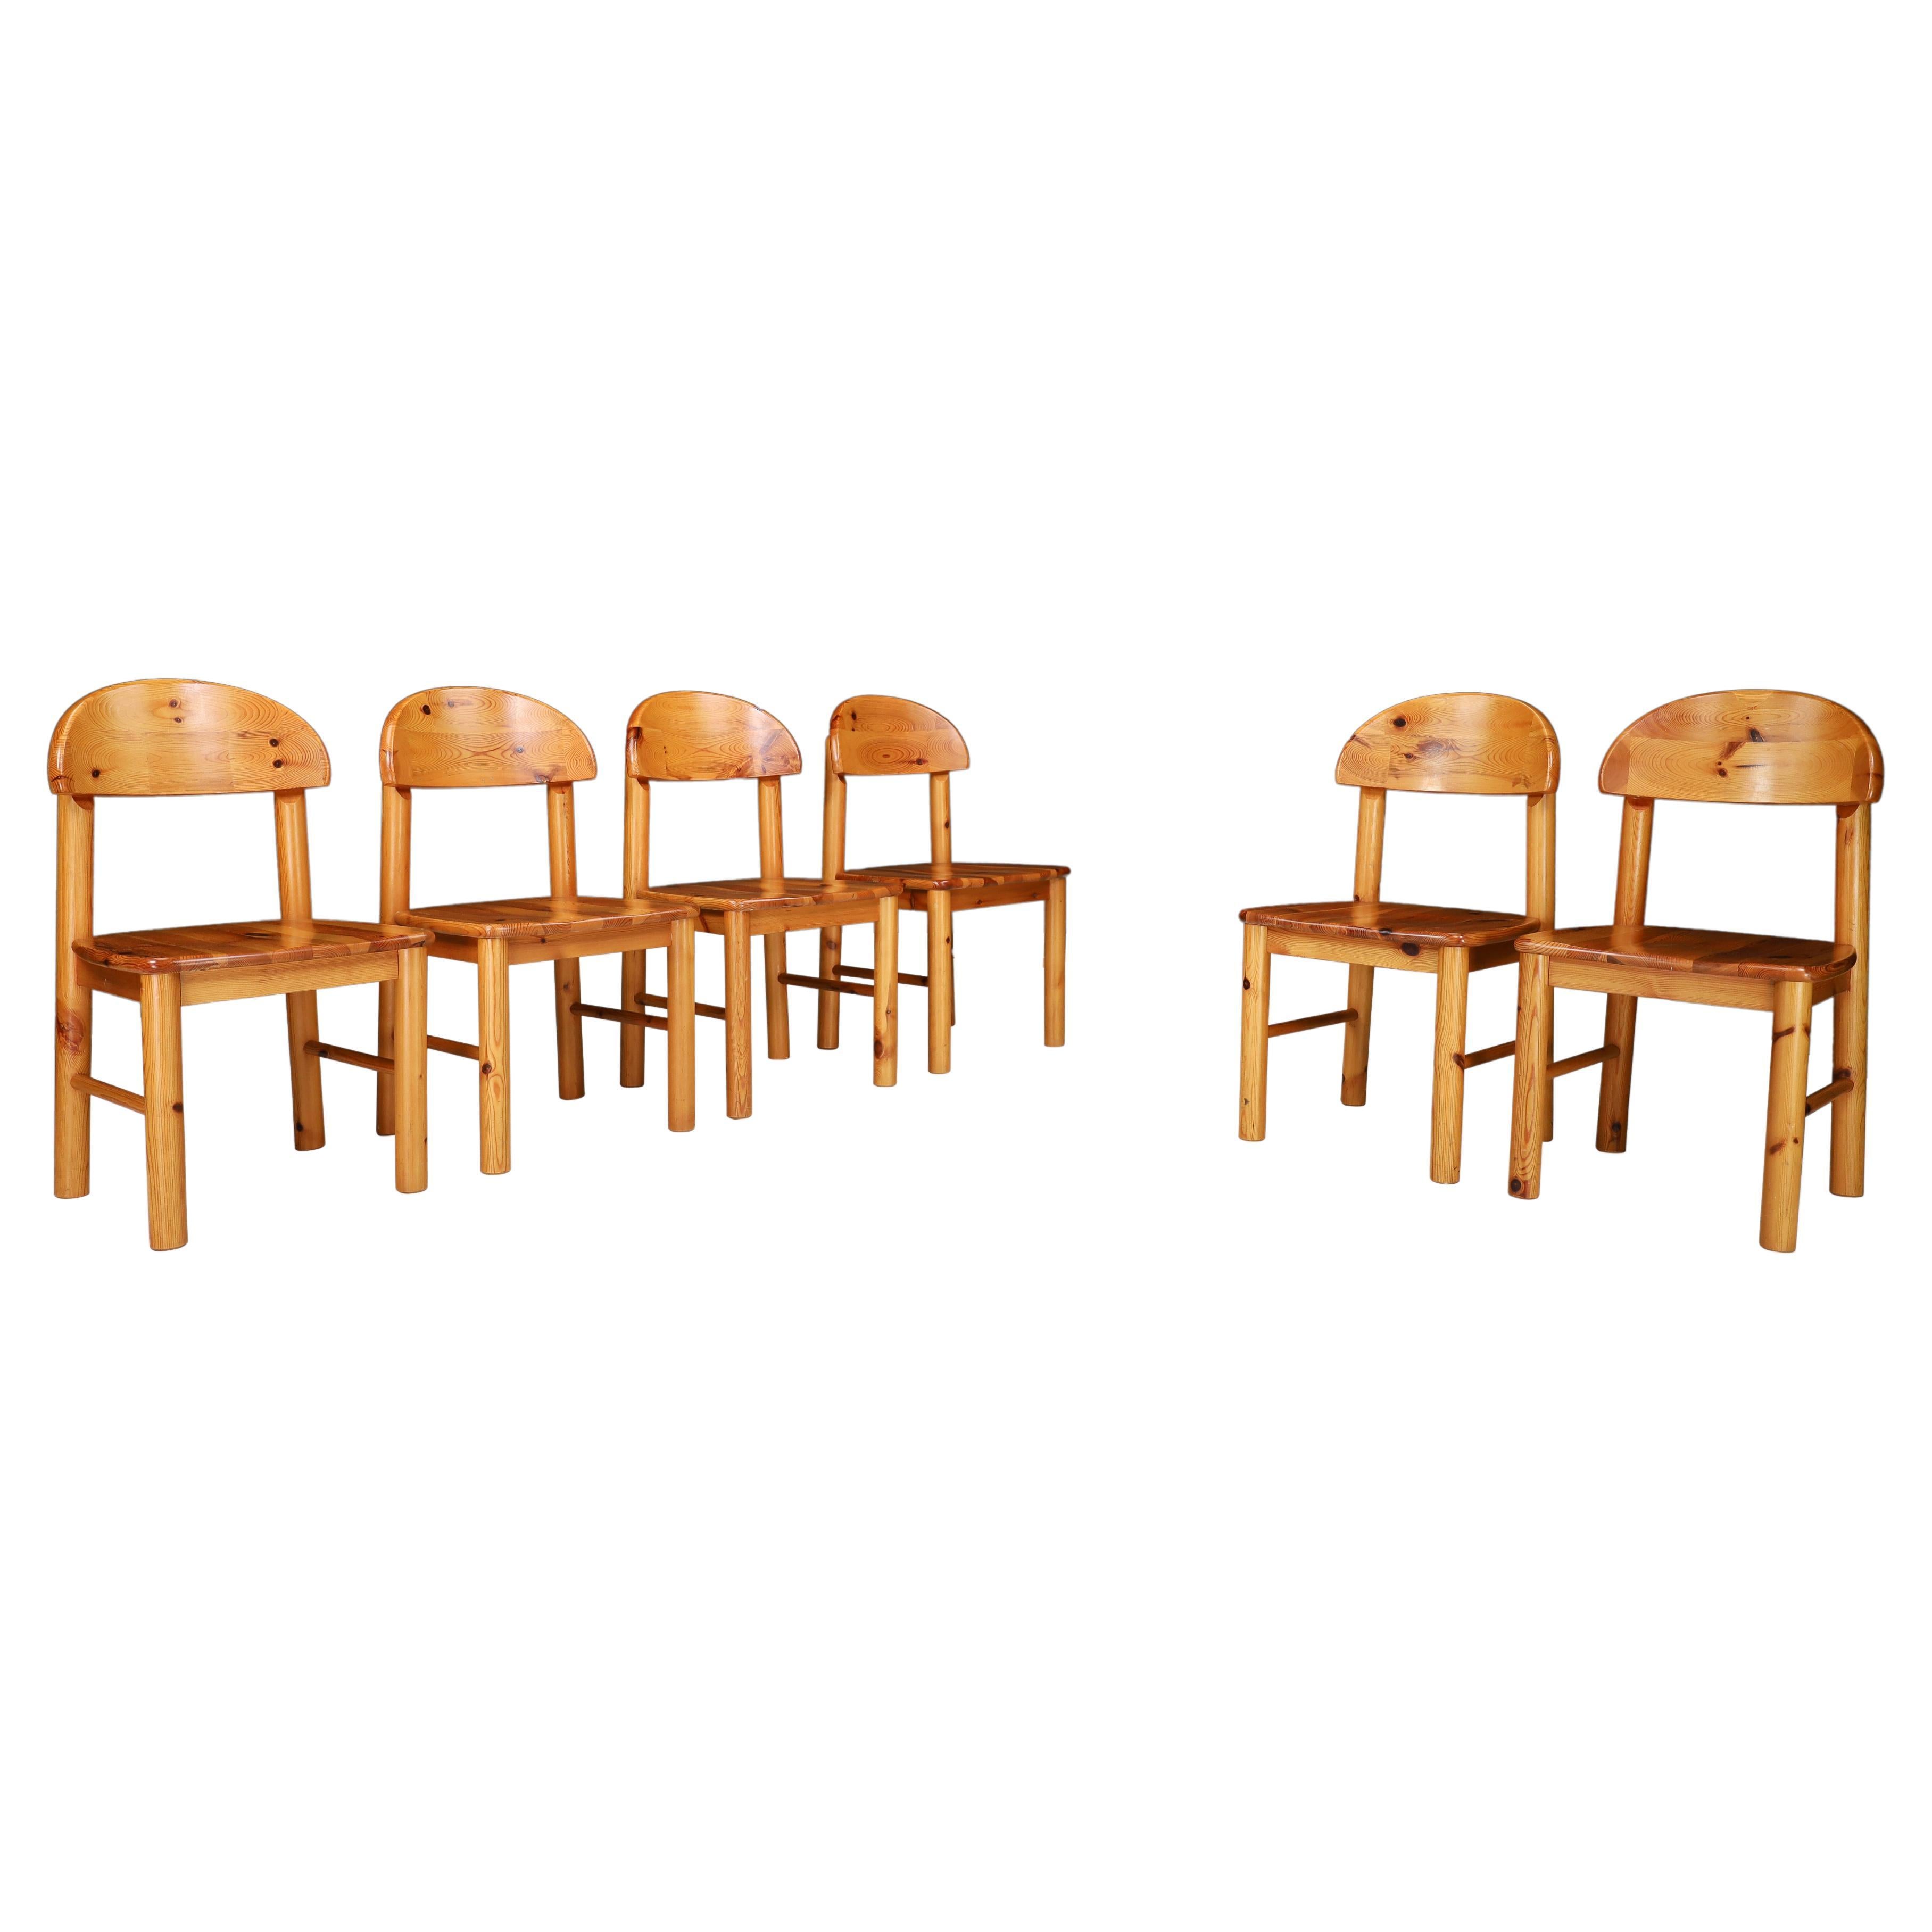 Rainer Daumiller Dining Chairs in Pine, Denmark, 1970s For Sale